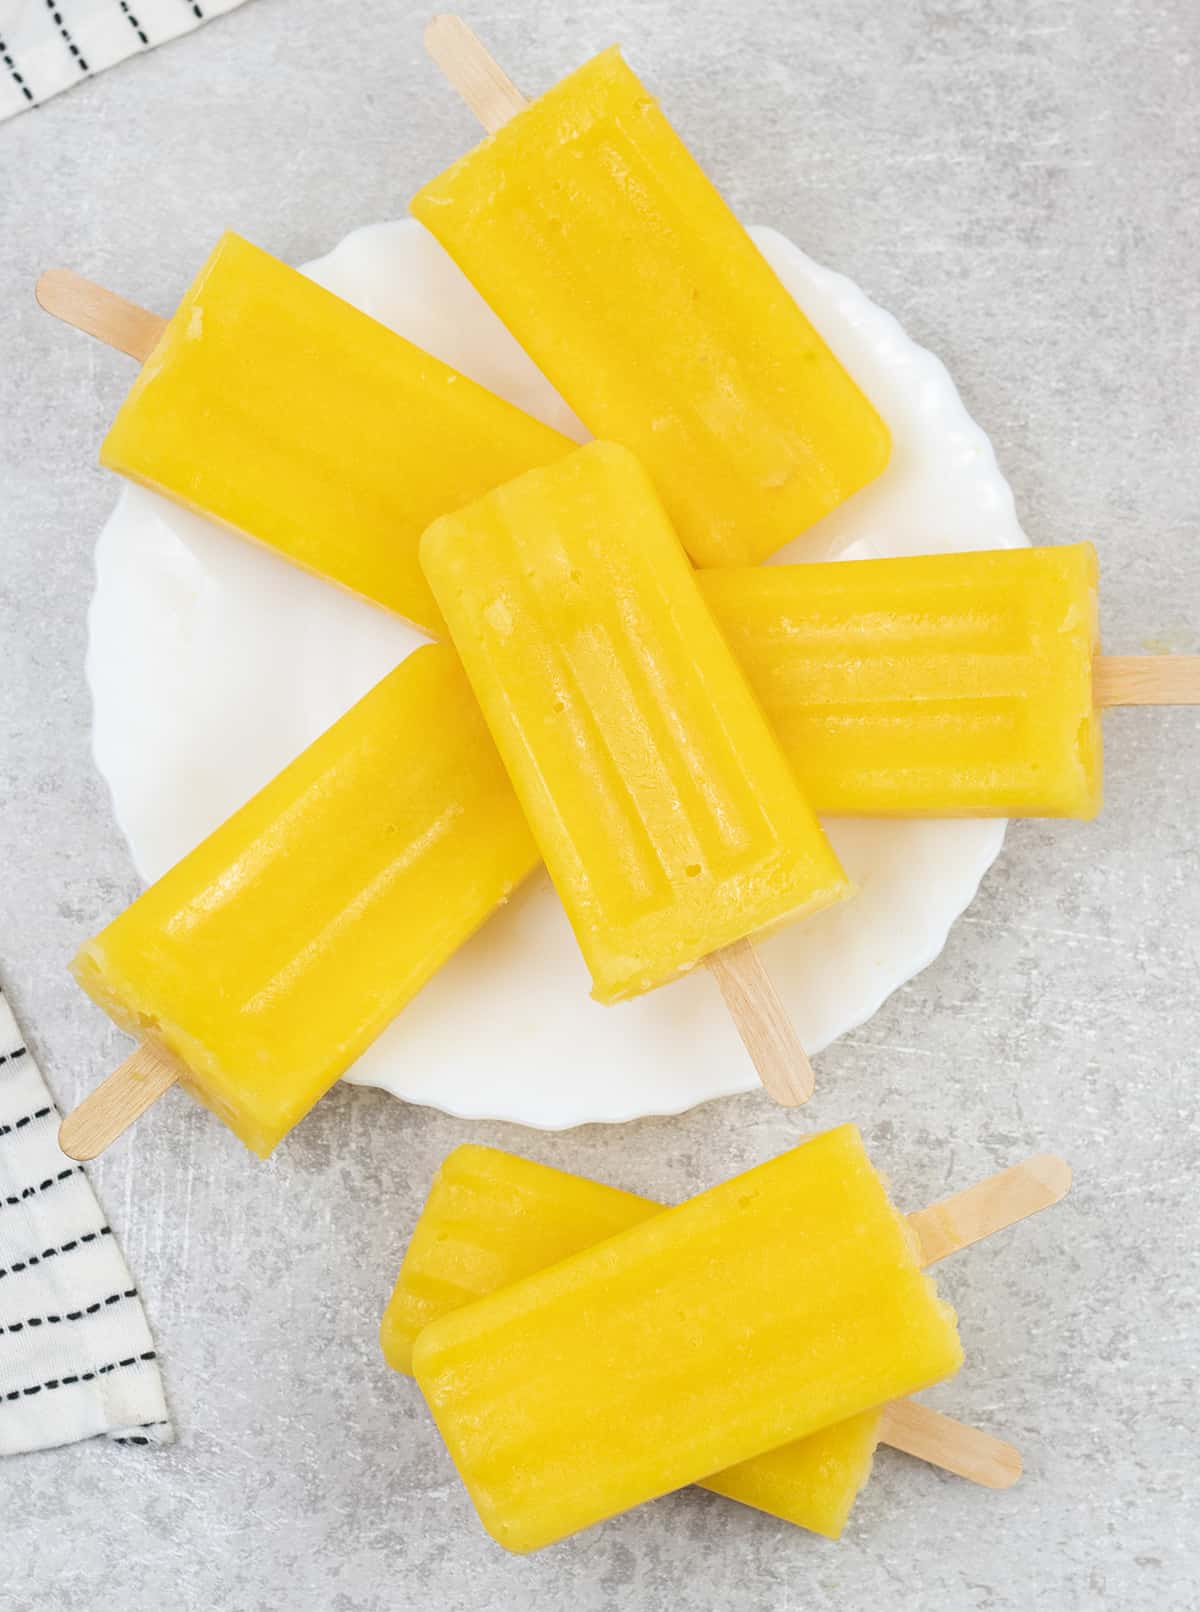 7 Mango Popsicles in a plate.